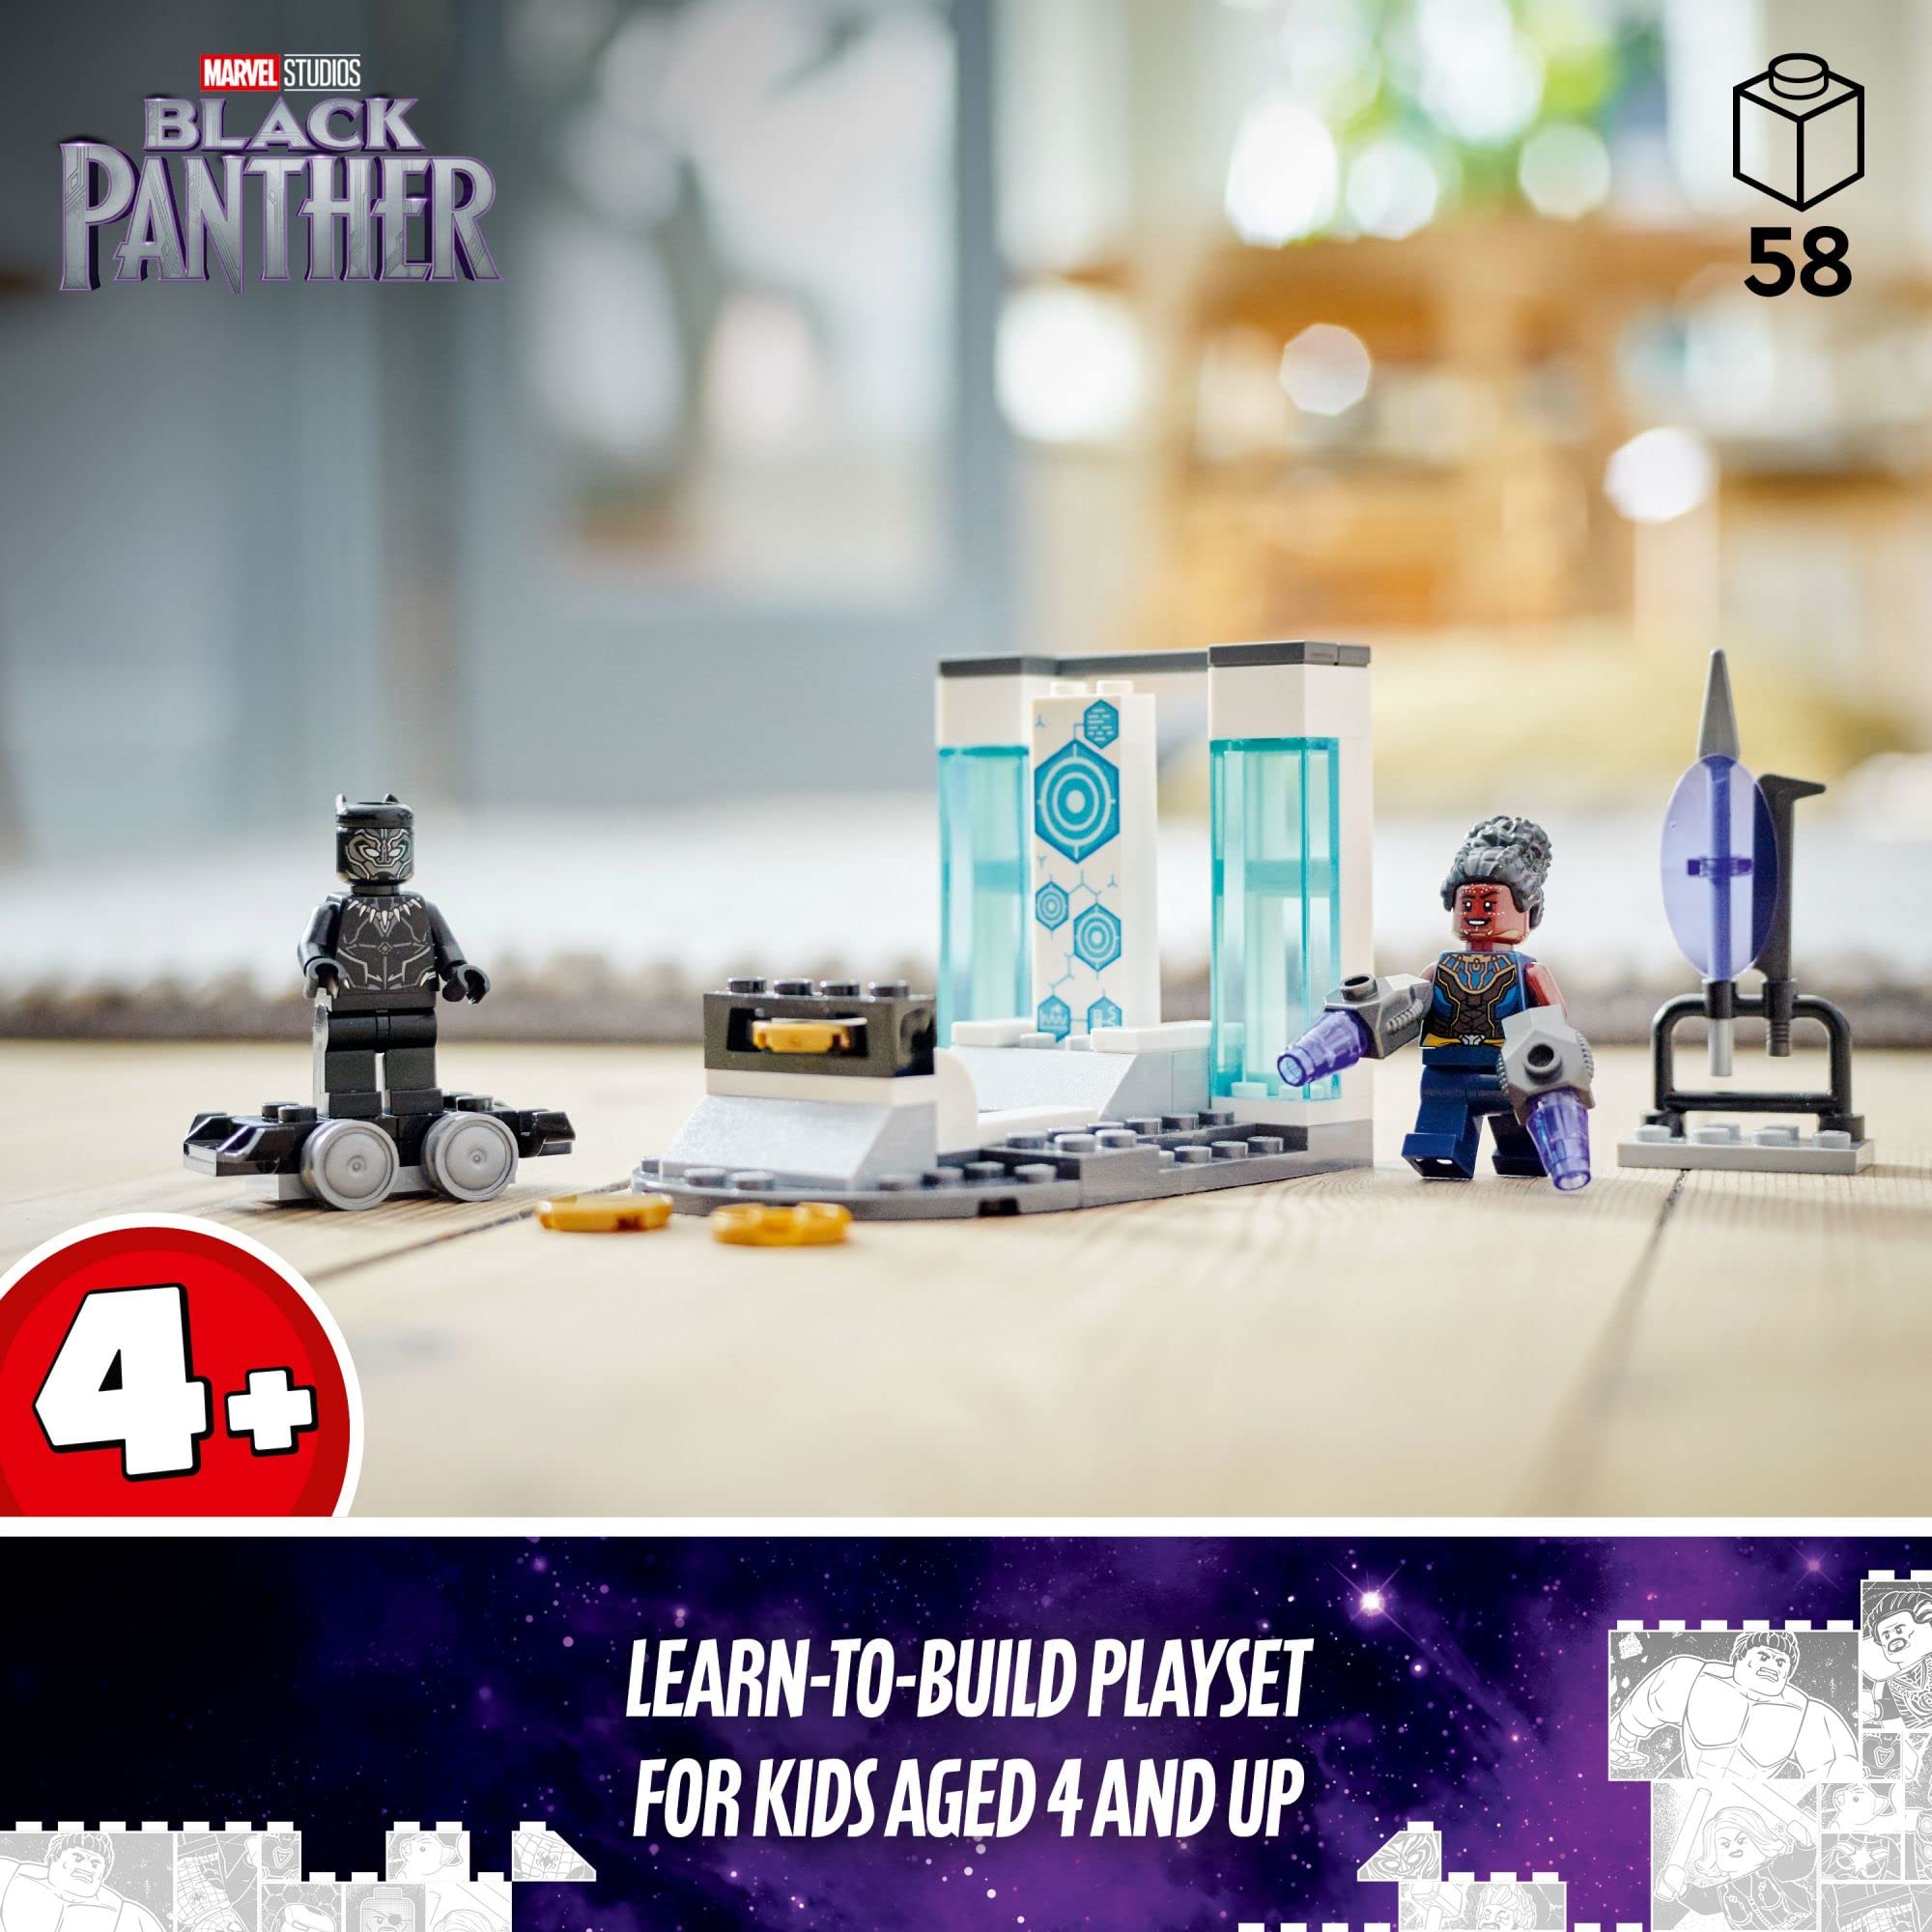 LEGO Marvel Shuri's Lab, 76212 Black Panther Construction Learning Toy with Minifigures, Toys for Kids, Girls and Boys Age 4, Avengers Super Heroes Gifts